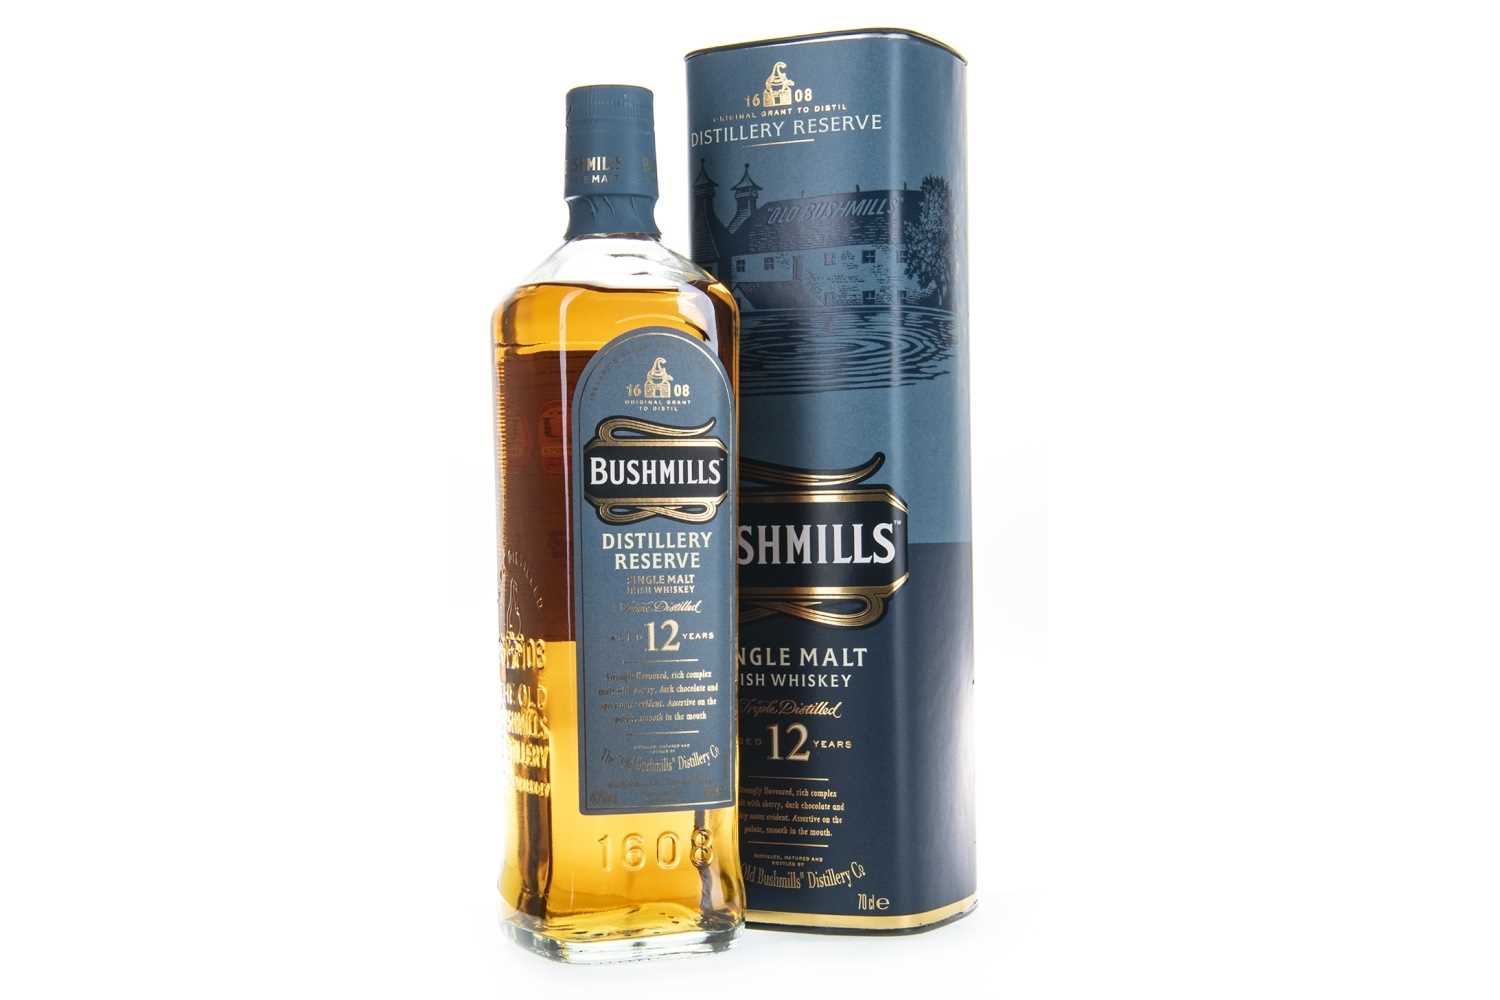 Lot 310 - BUSHMILLS DISTILLERY RESERVE AGED 12 YEARS